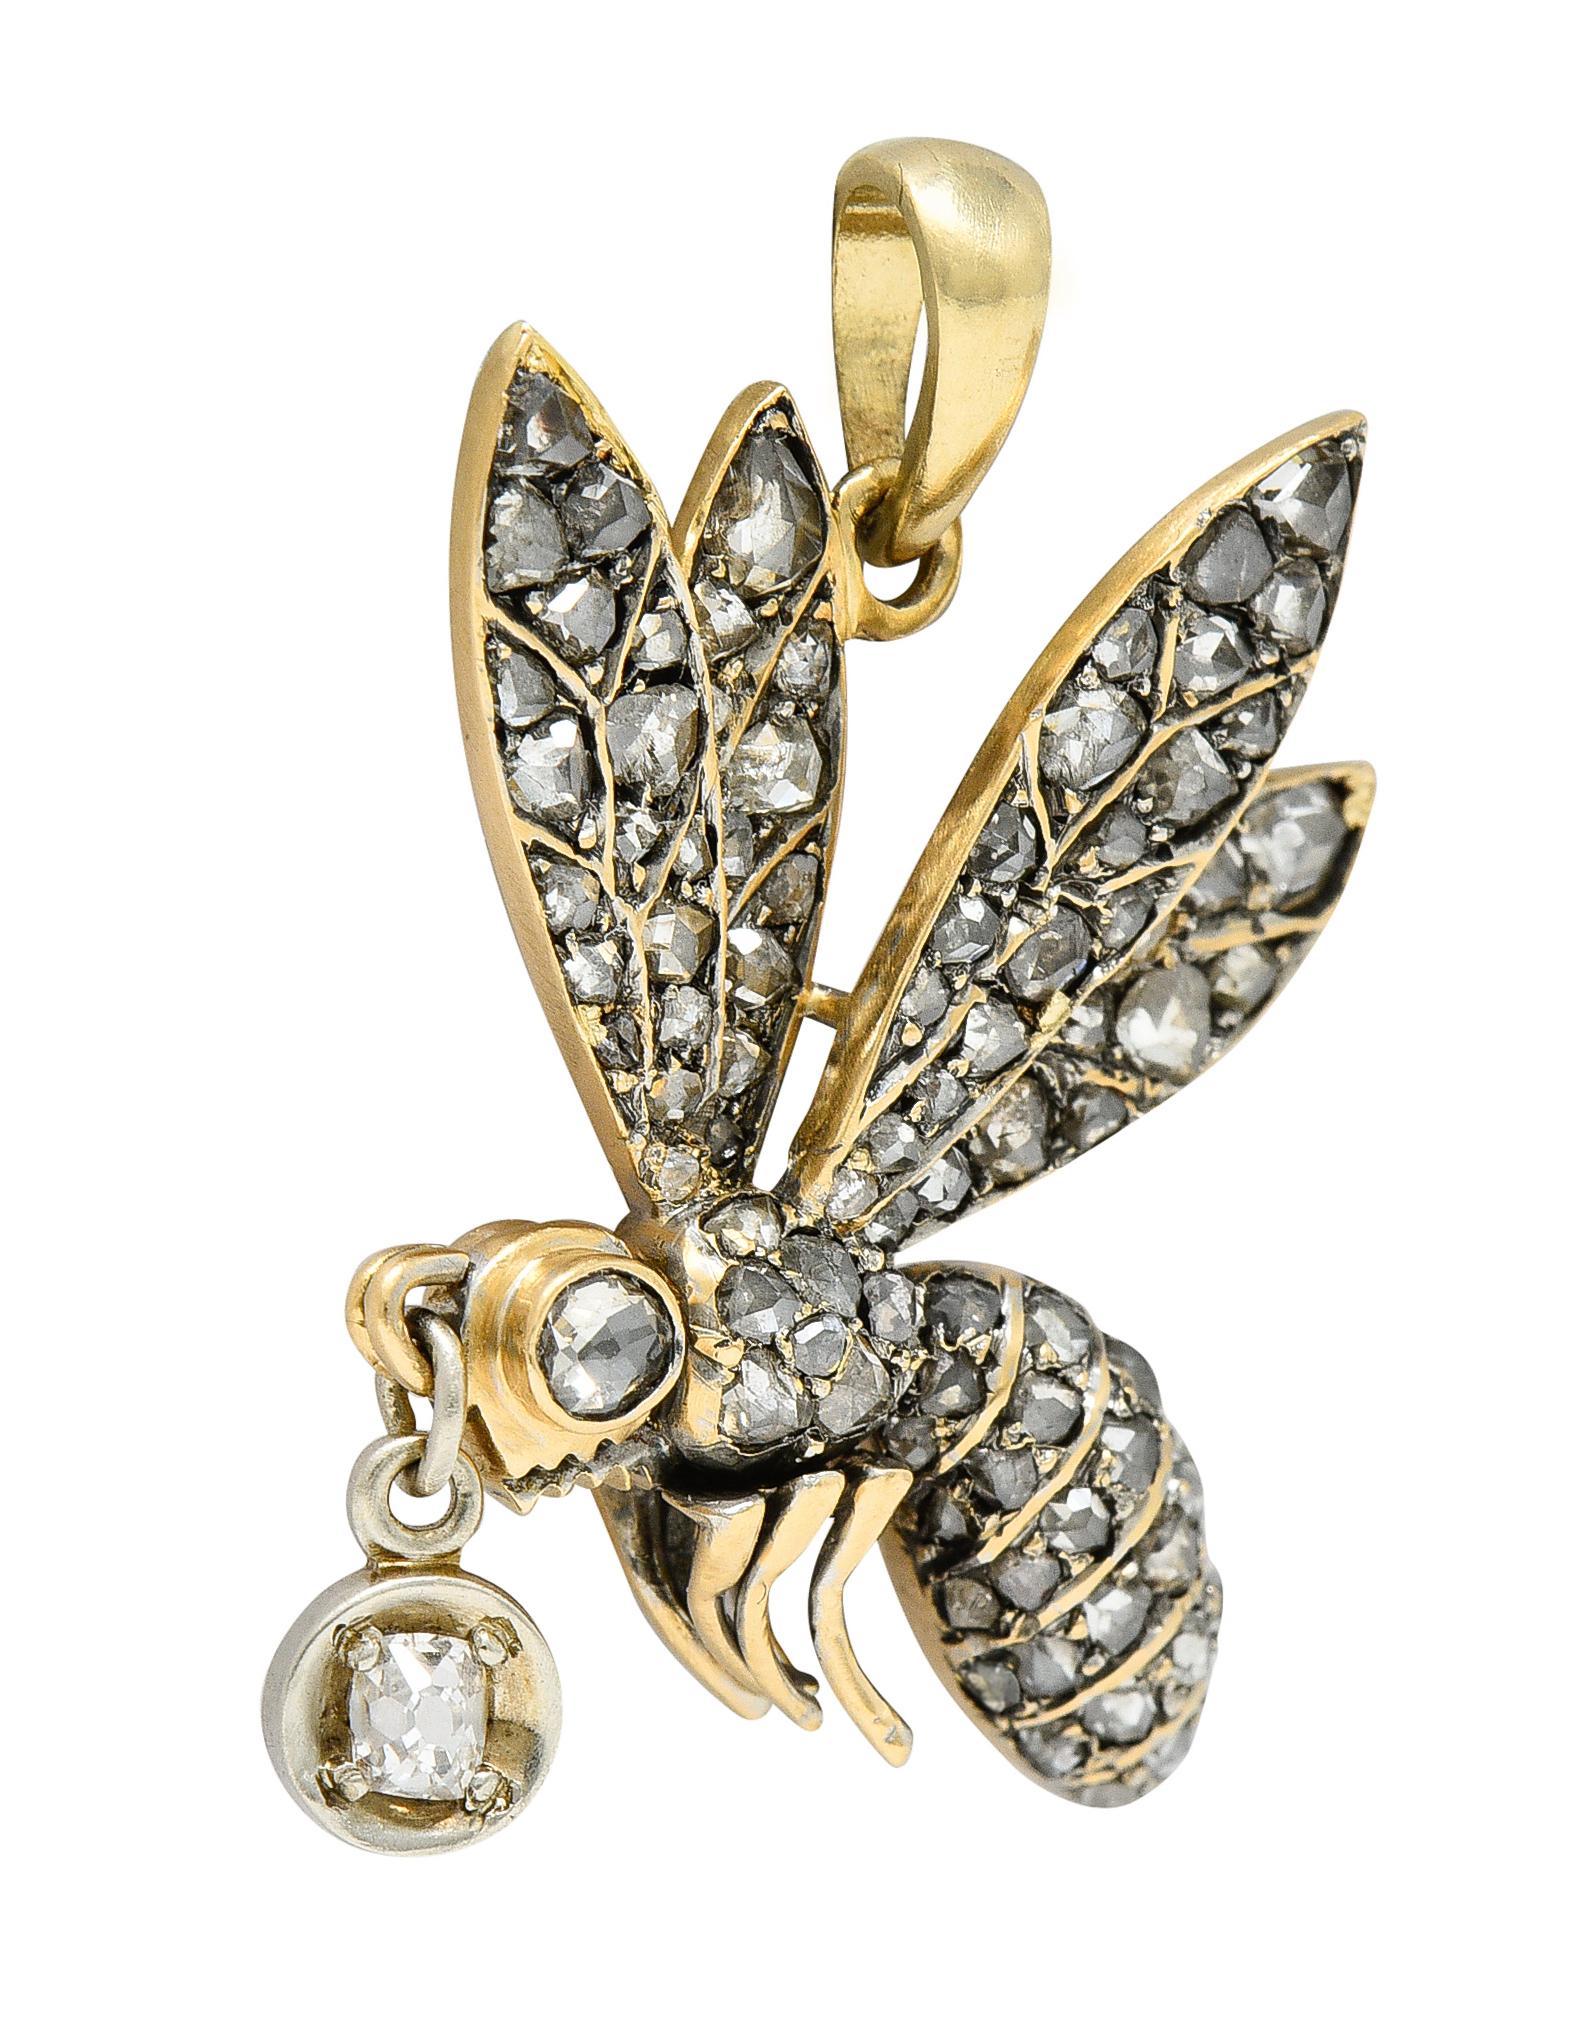 Pendant charm is designed as a stylized bee with 